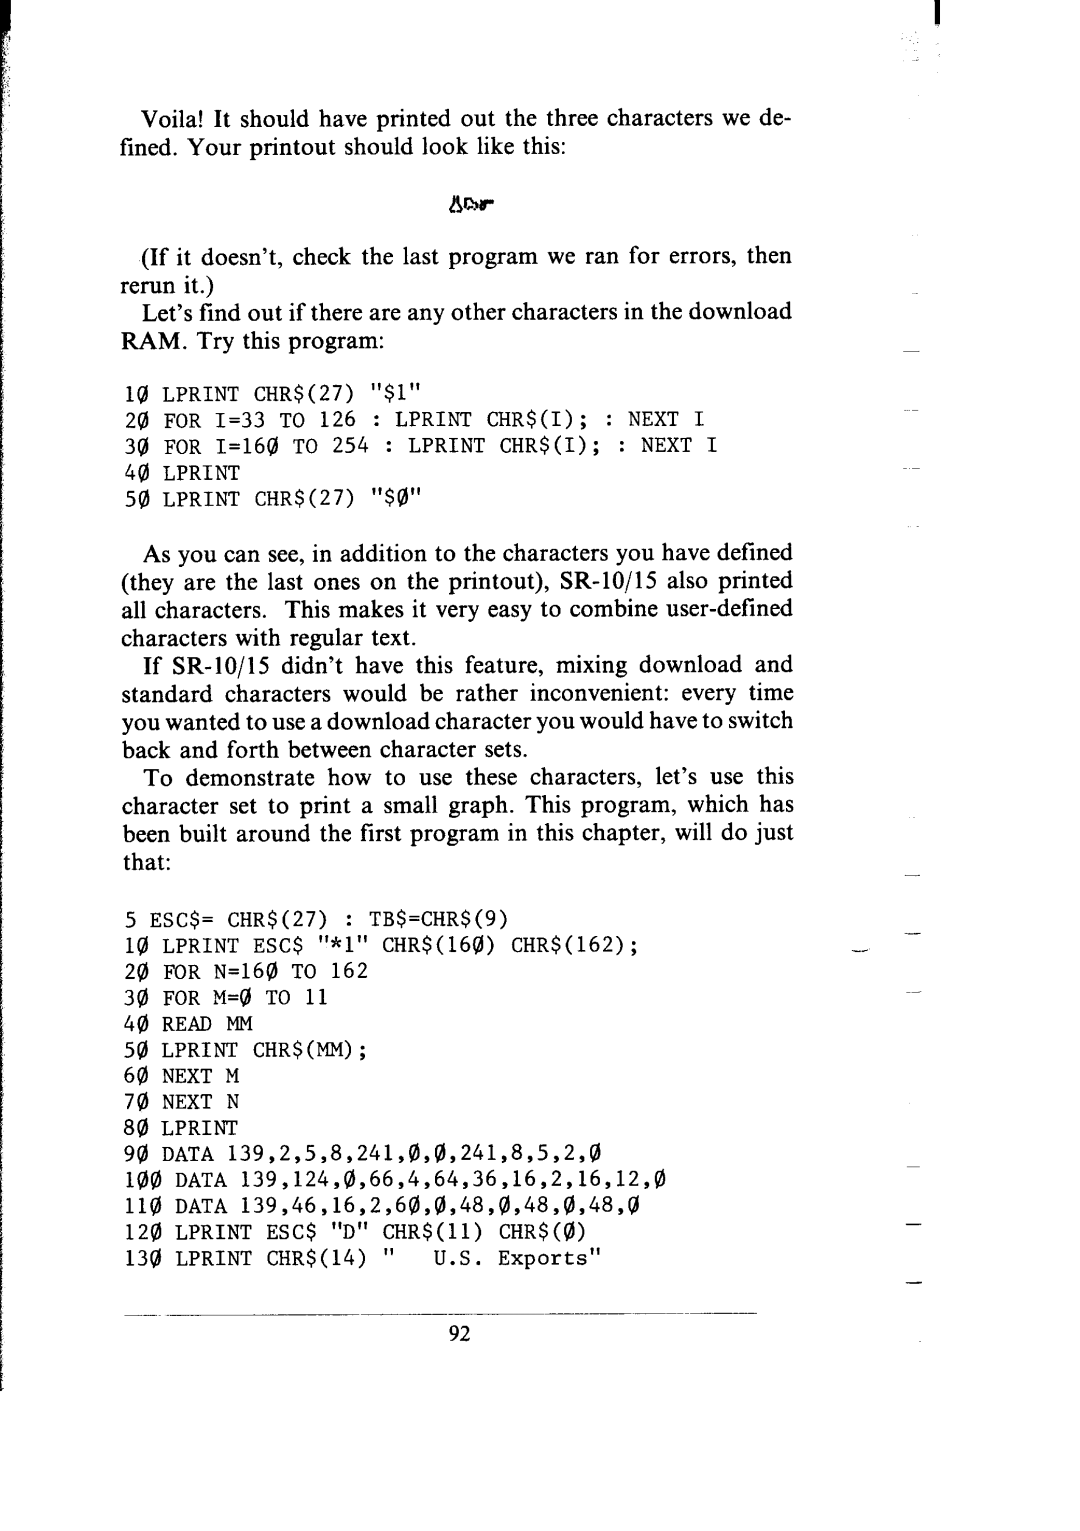 Star Micronics SR-10/I5 user manual If it doesn’t, check the last program we ran for errors, then rerun it 